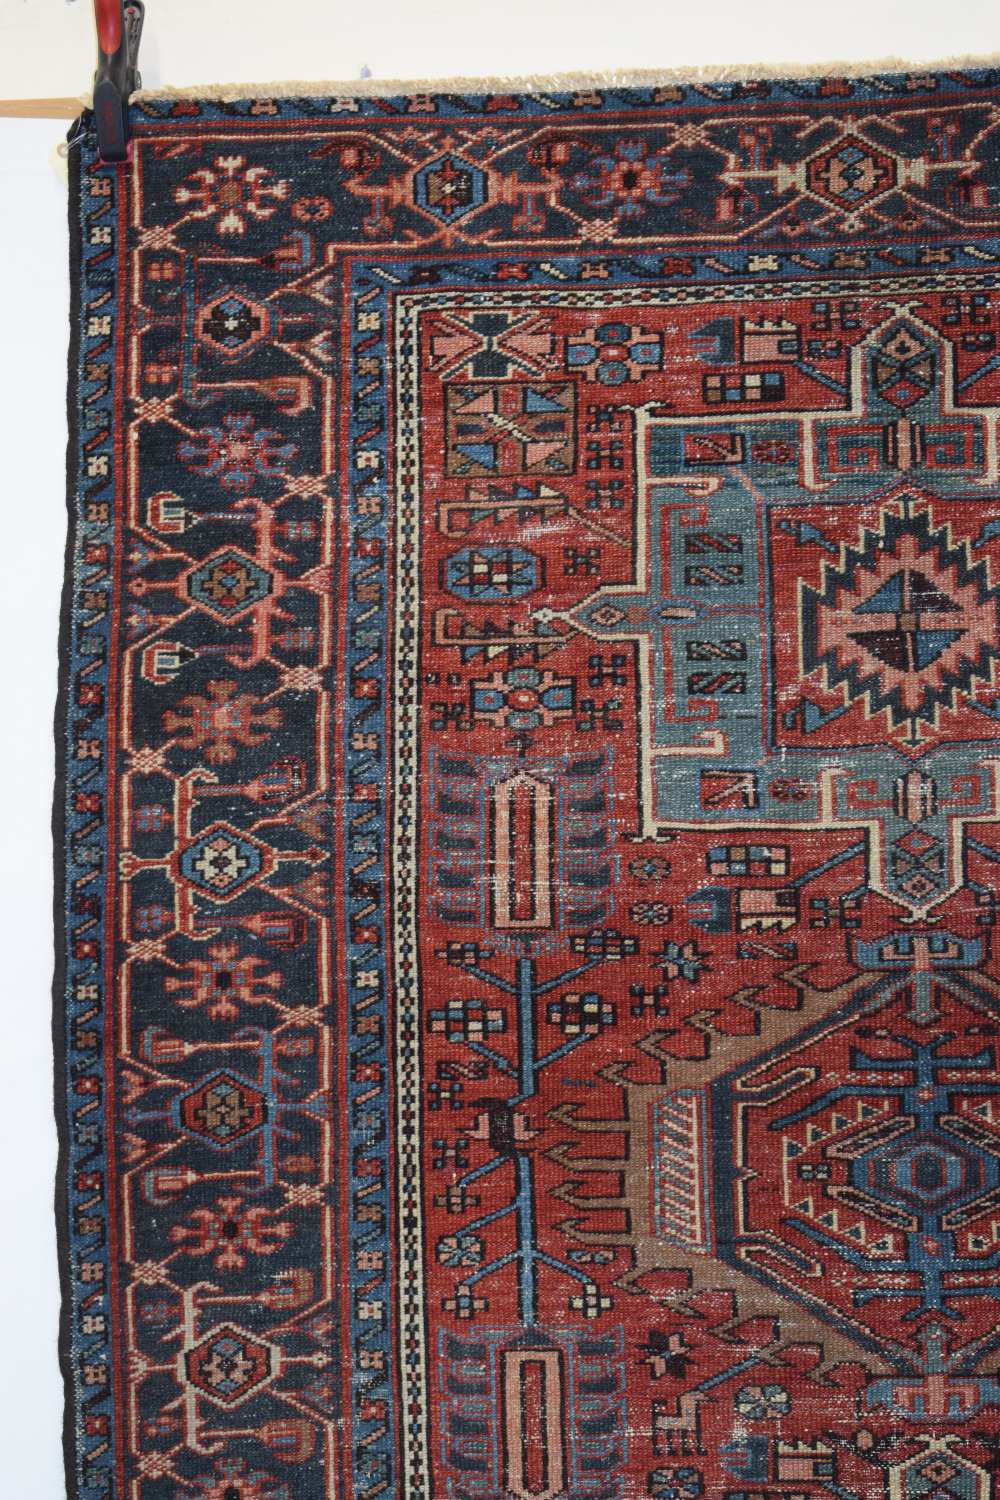 Karaja rug, north west Persia, circa 1930s-40s, 5ft. 11in. X 4ft. 11in. 1.80m. X 1.50m. Overall - Image 4 of 9